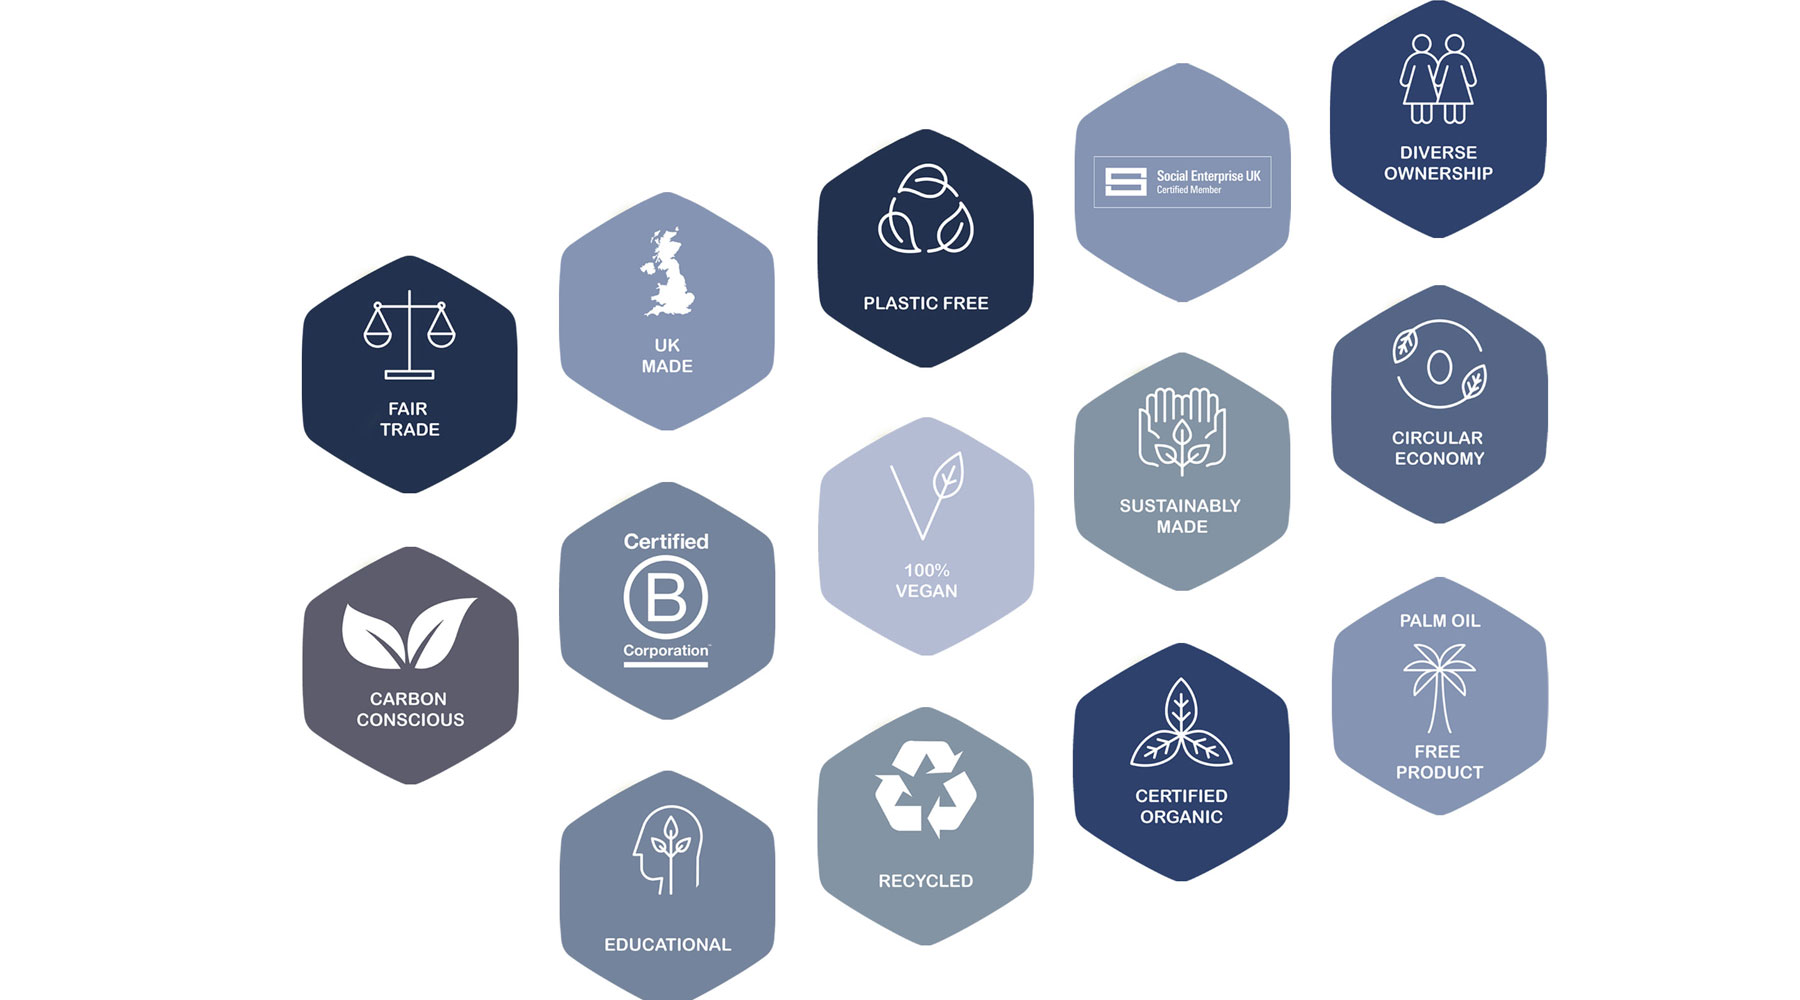 An image showing a range of 14 ethical values that a company could use as a basis for selecting sustainable corporate gifts